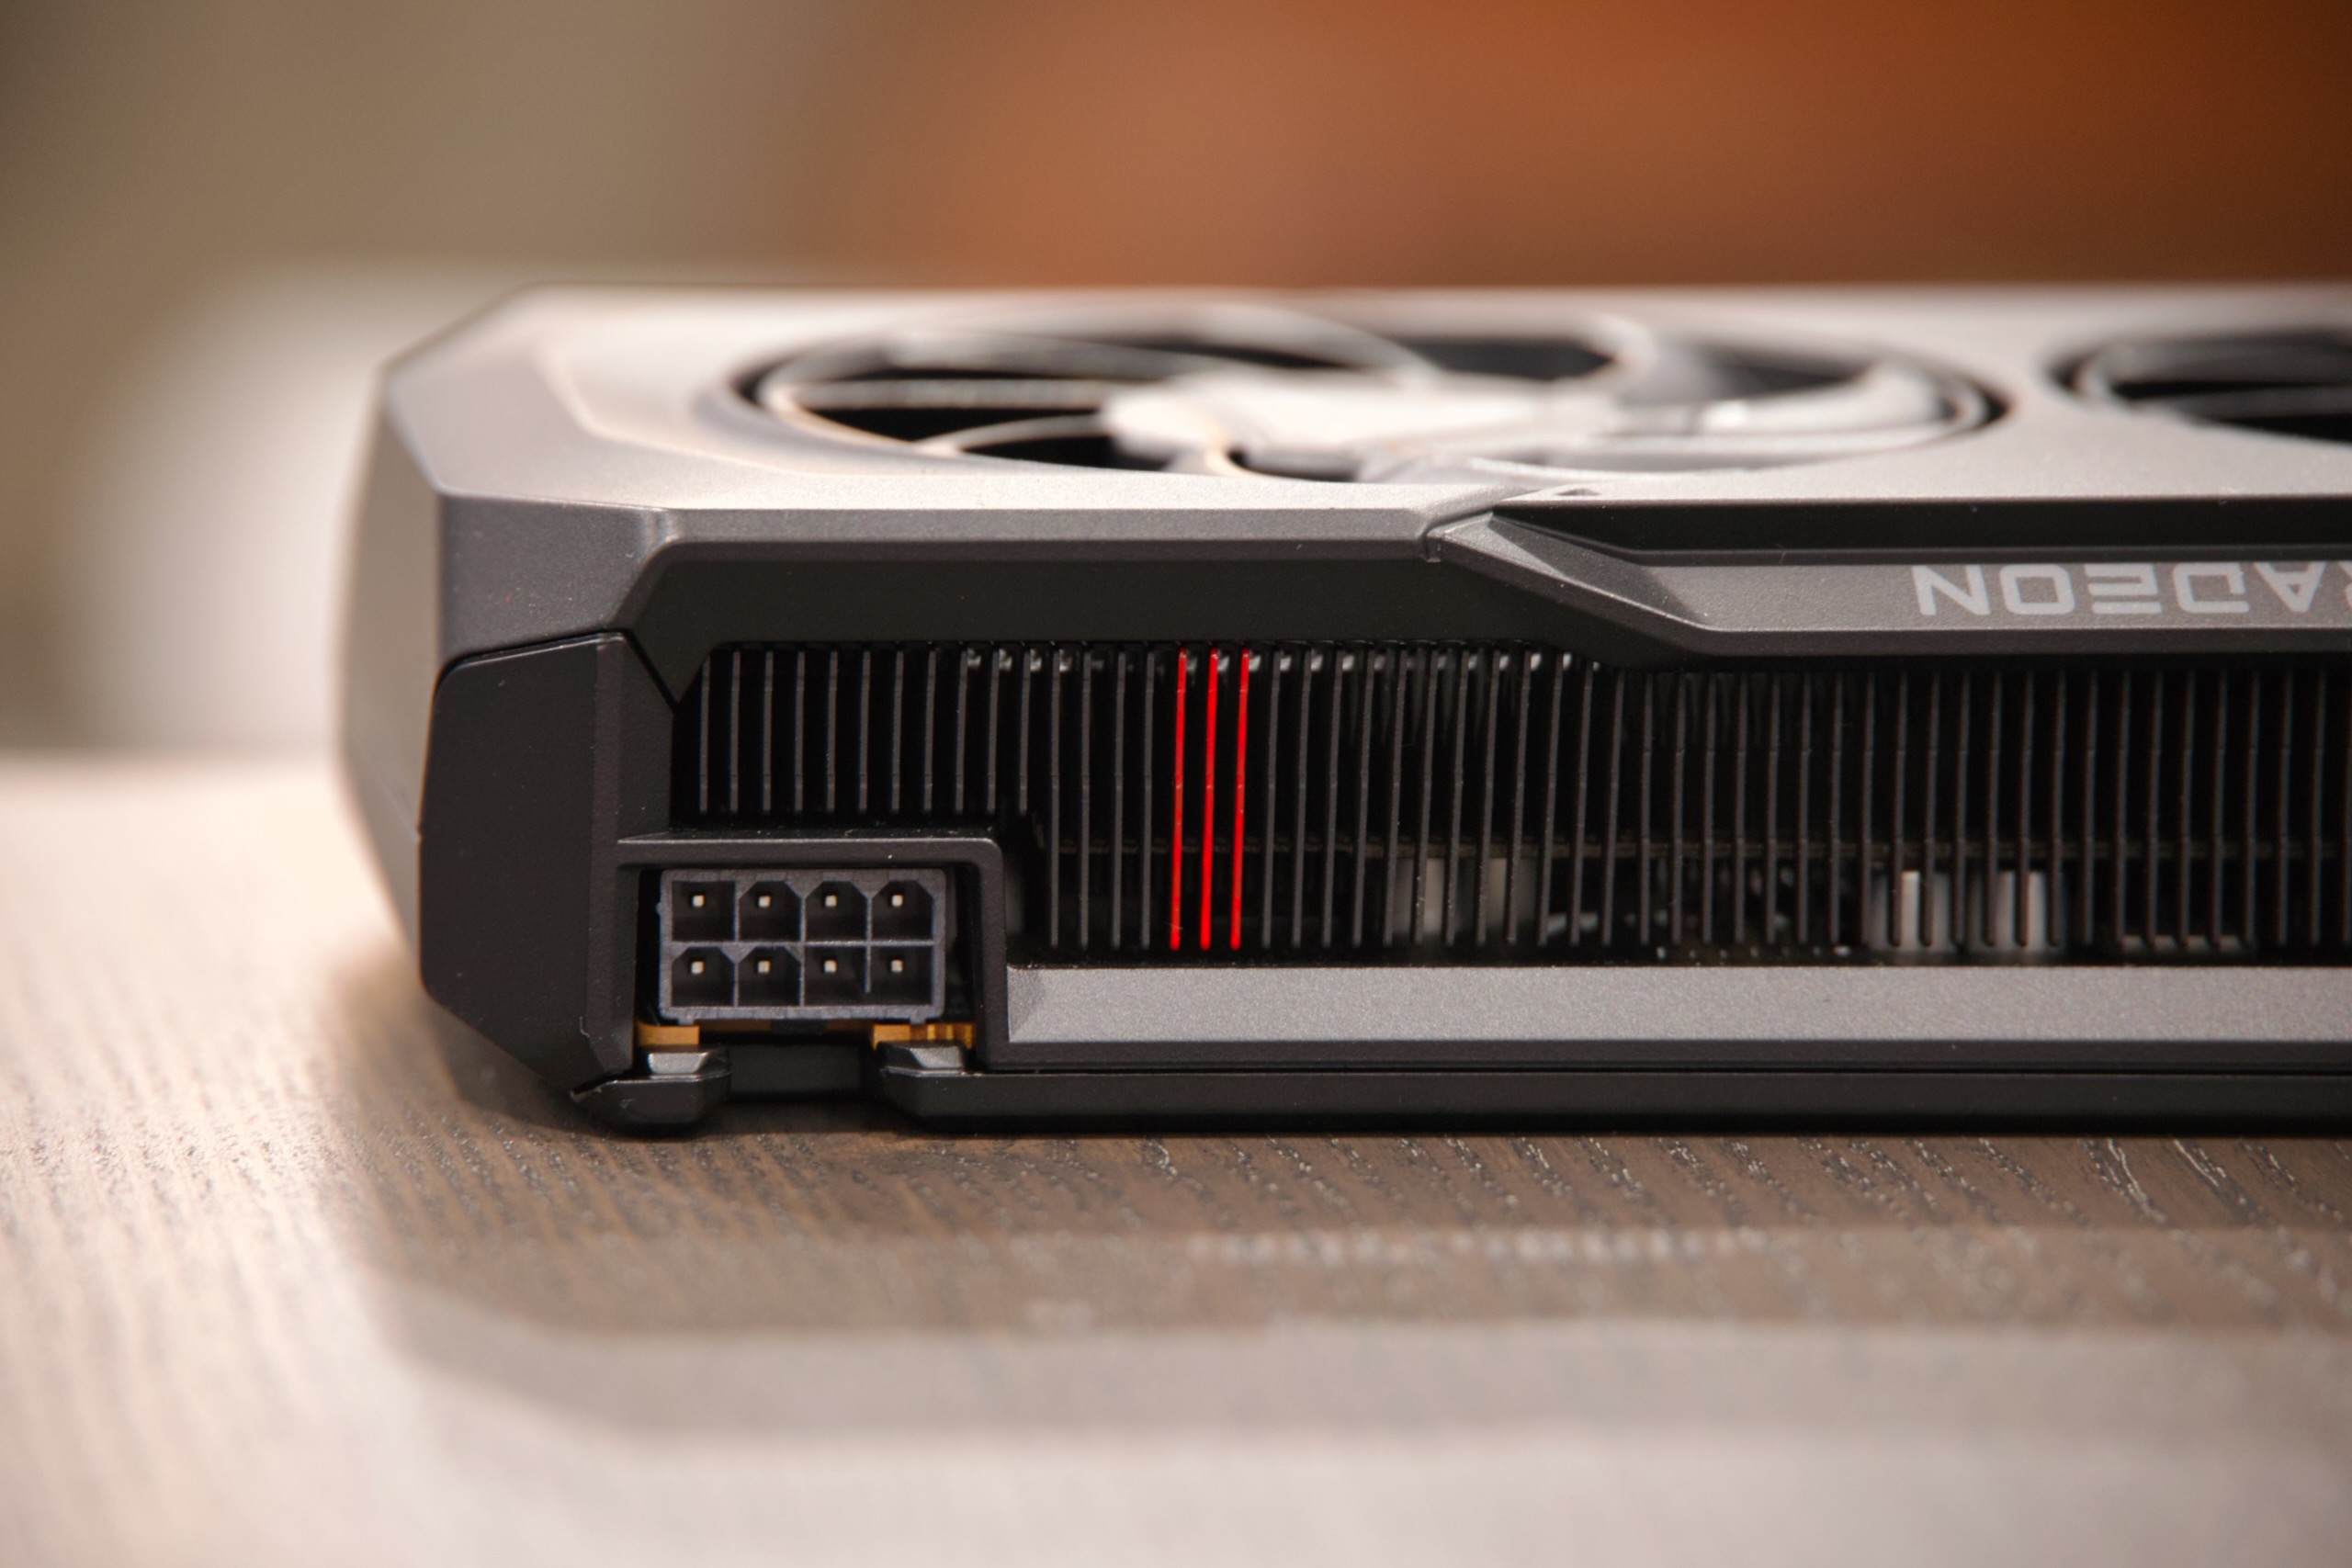 Unlike Nvidia's cards, AMD's reference cards stick with the 8-pin PCIe power connector.